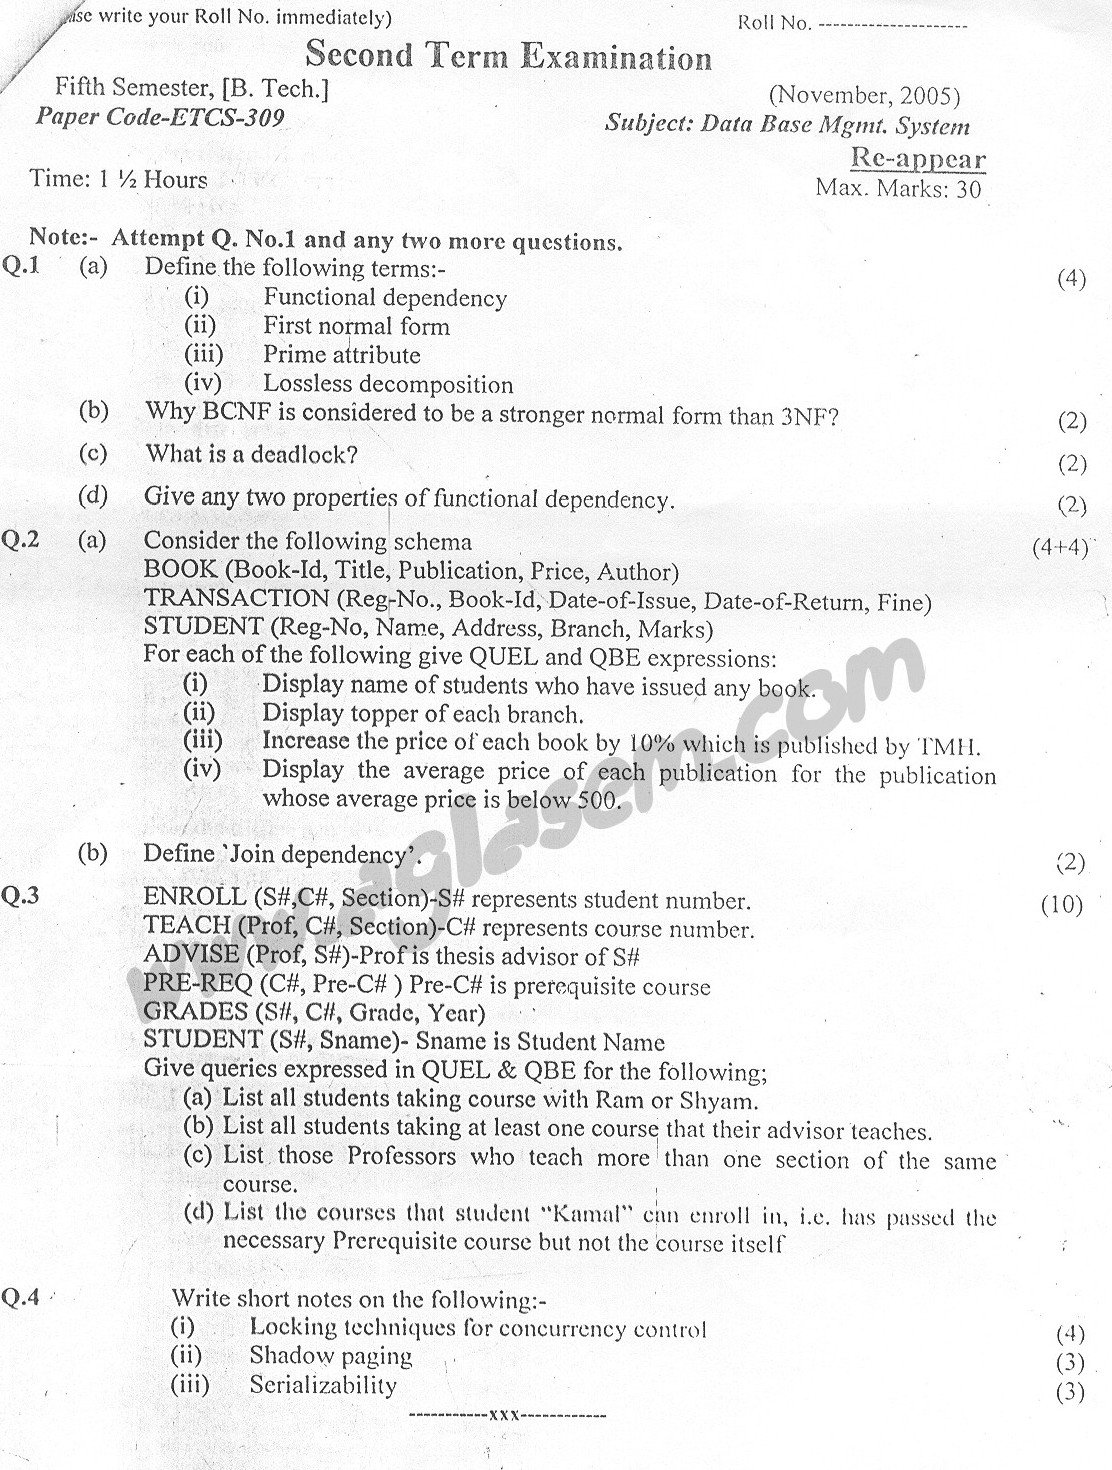 GGSIPU Question Papers Fifth Semester – Second Term 2005 – ETCS-309